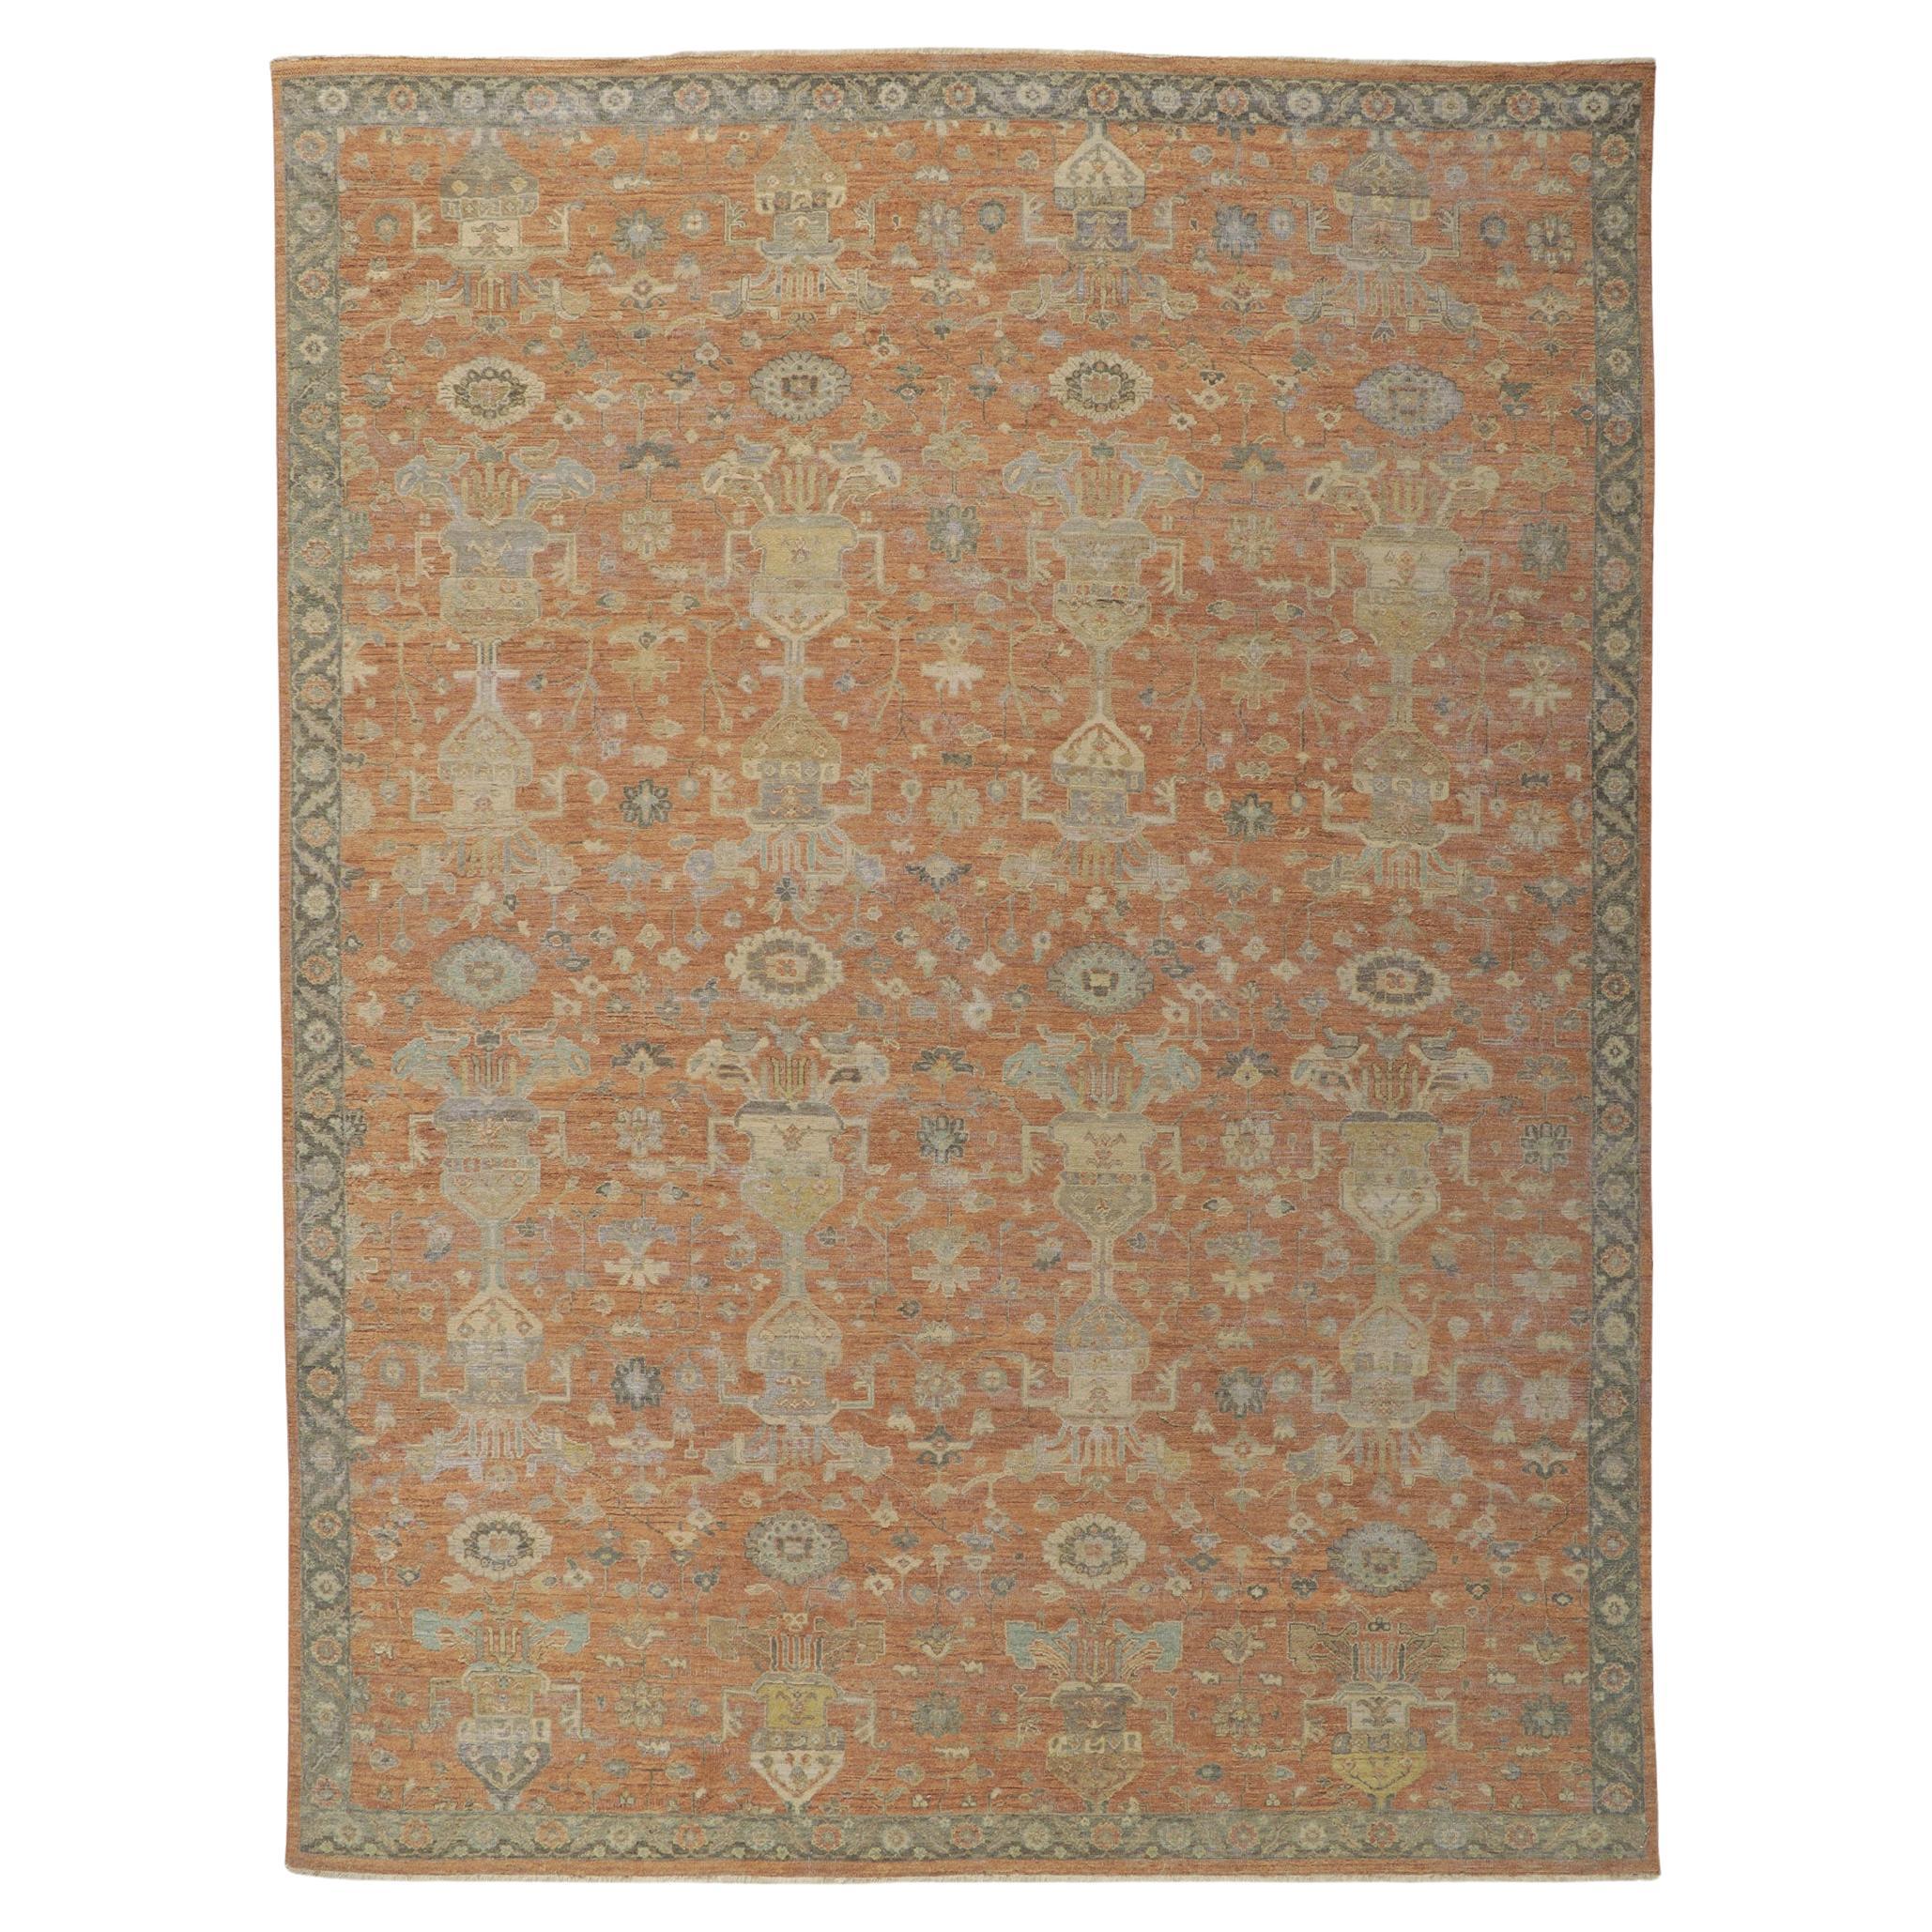 New Distressed Oushak Rug with Vintage Style